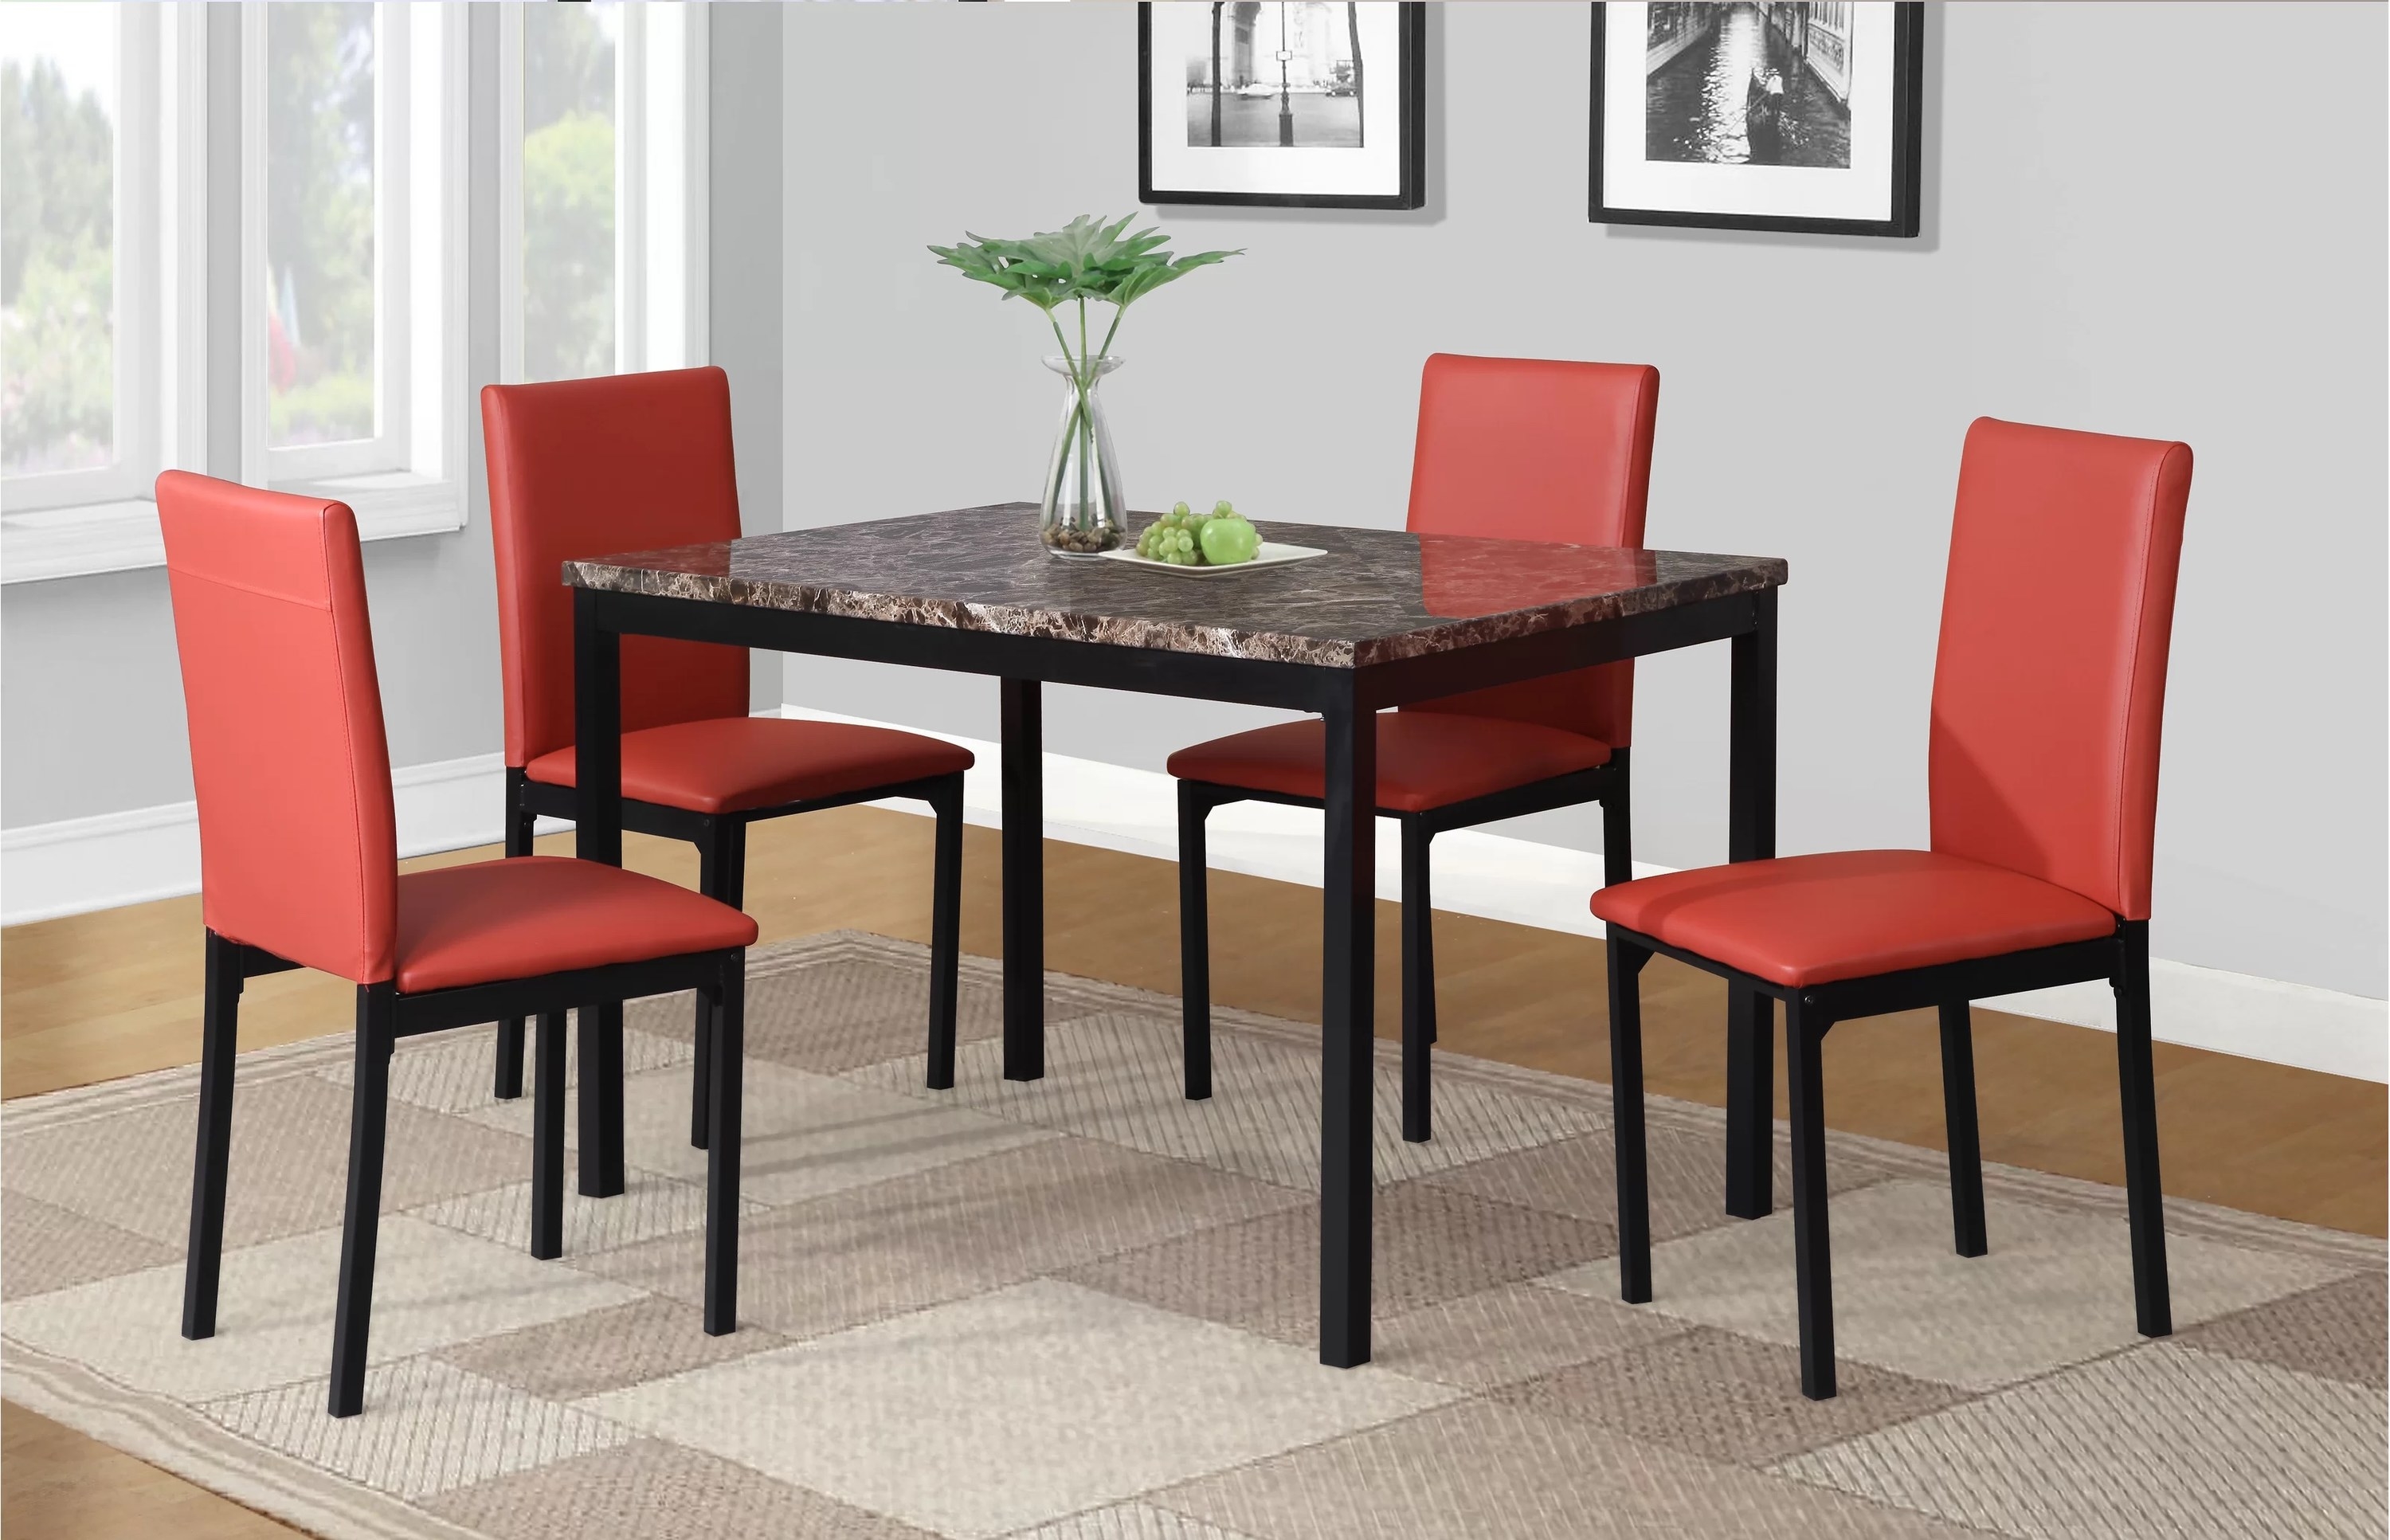 the four red fabric dining chairs and black marble table